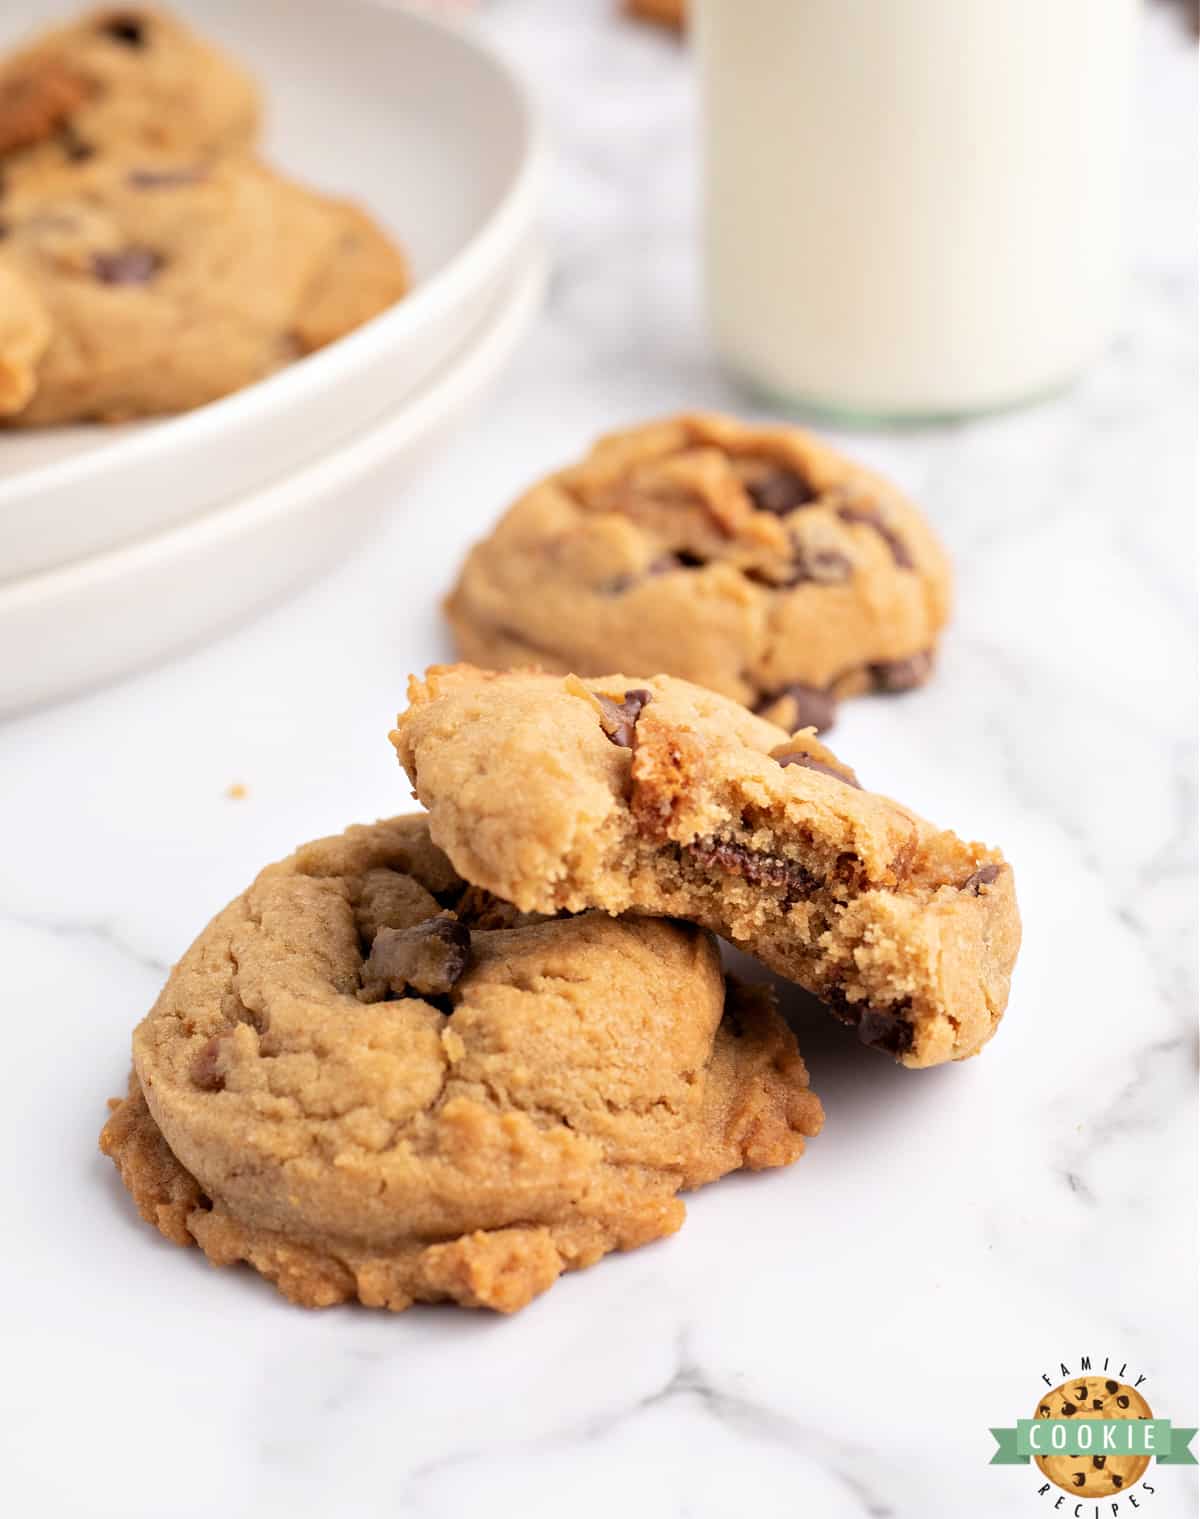 Biscoff Chocolate Chip Cookies are made with Biscoff spread and crumbled Biscoff cookies for a delicious twist on the classic chocolate chip cookie recipe. The cookie butter adds so much flavor to these soft and chewy cookies. 